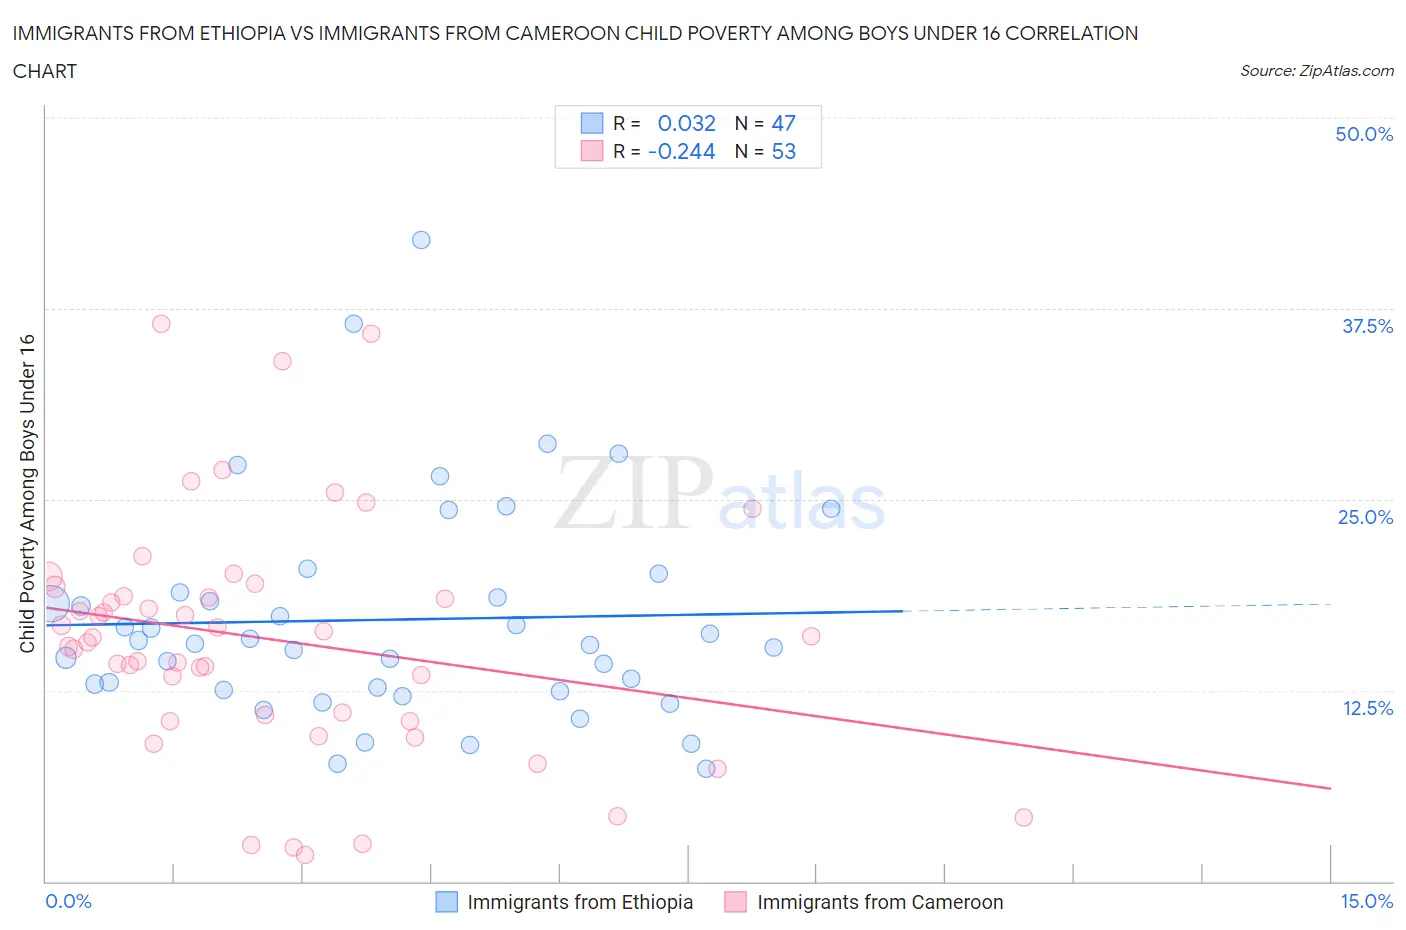 Immigrants from Ethiopia vs Immigrants from Cameroon Child Poverty Among Boys Under 16